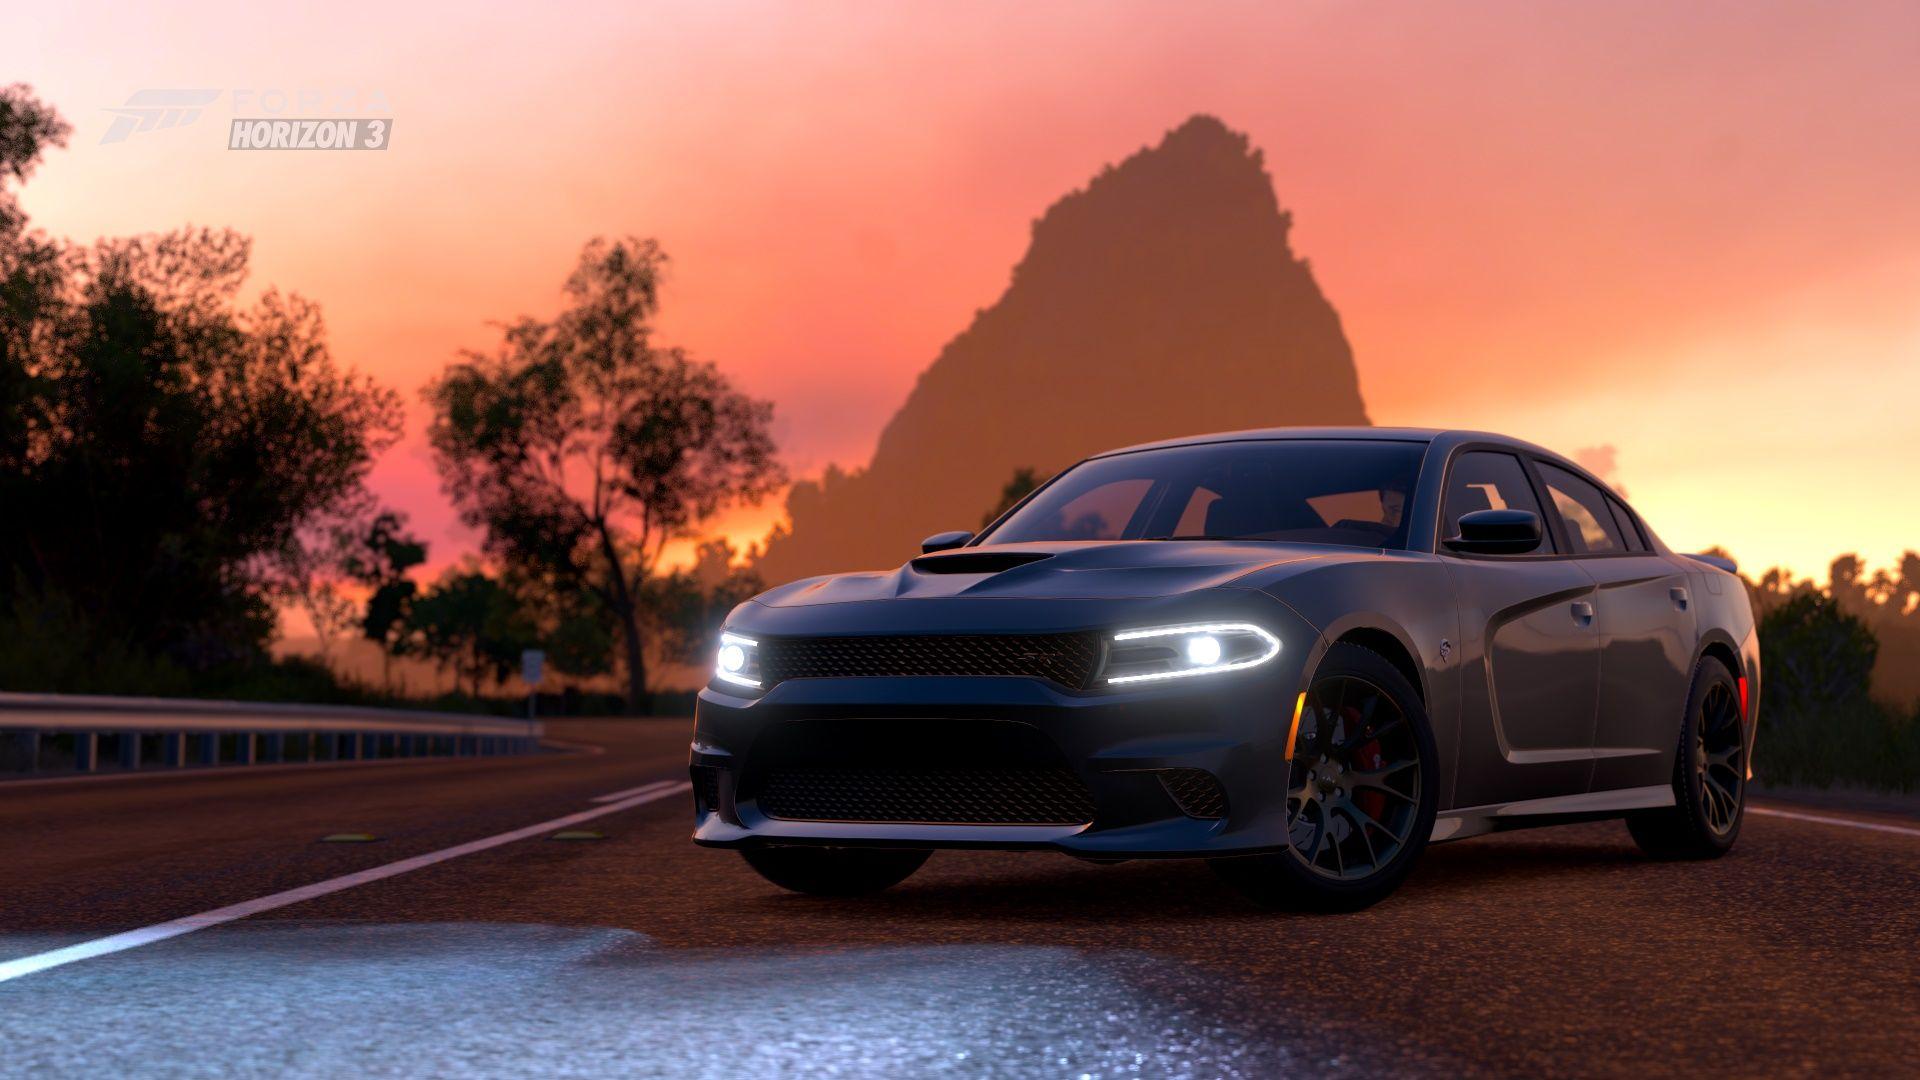 Dodge Charger SRT Hellcat Full HD Wallpaper and Background